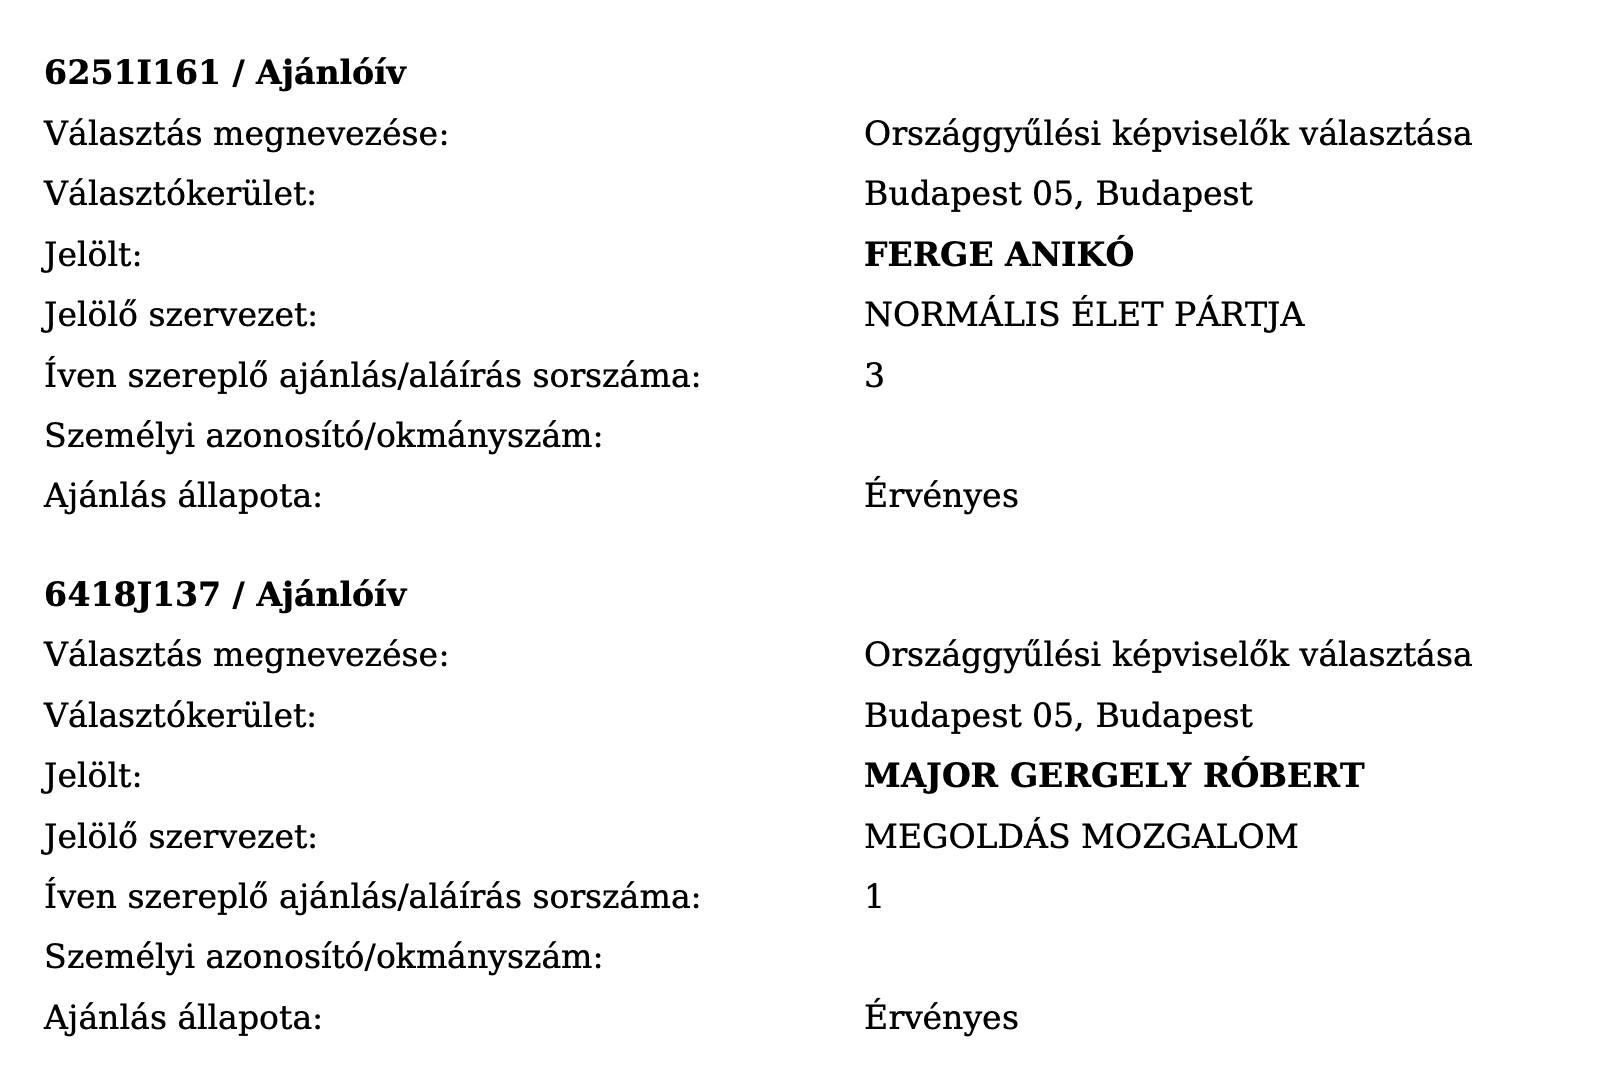 Police Investigating Dozens of Forged Signatures Ahead of Hungarian Parliamentary Election